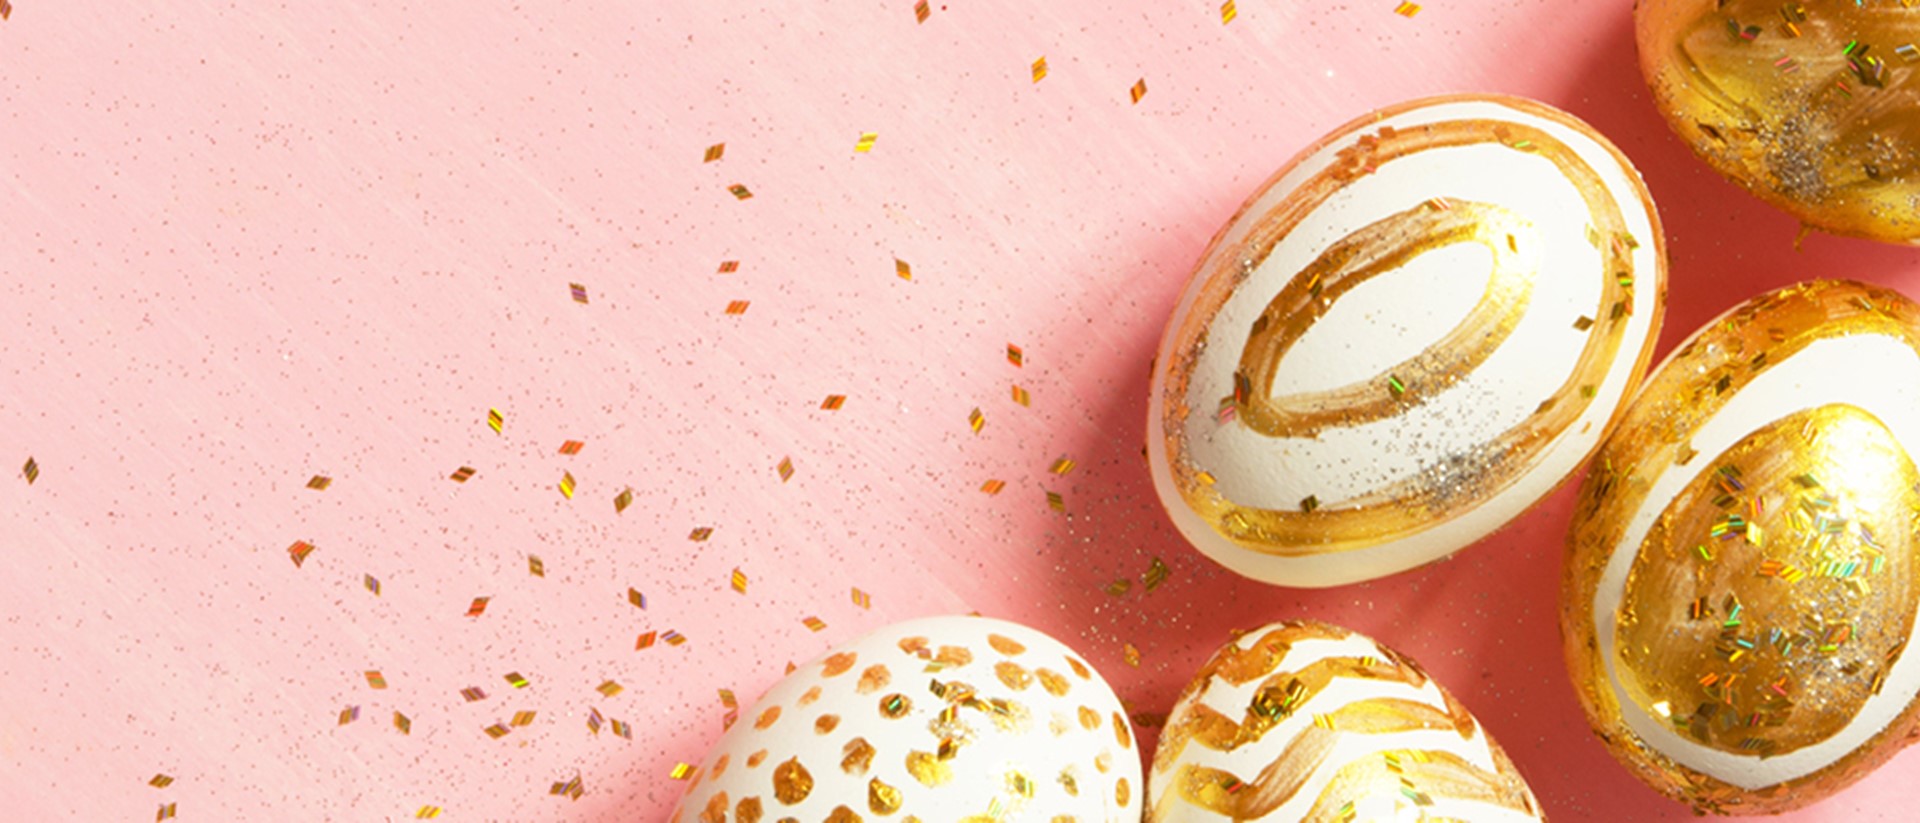 Image of eggs painted gold in different patterns on a pink background